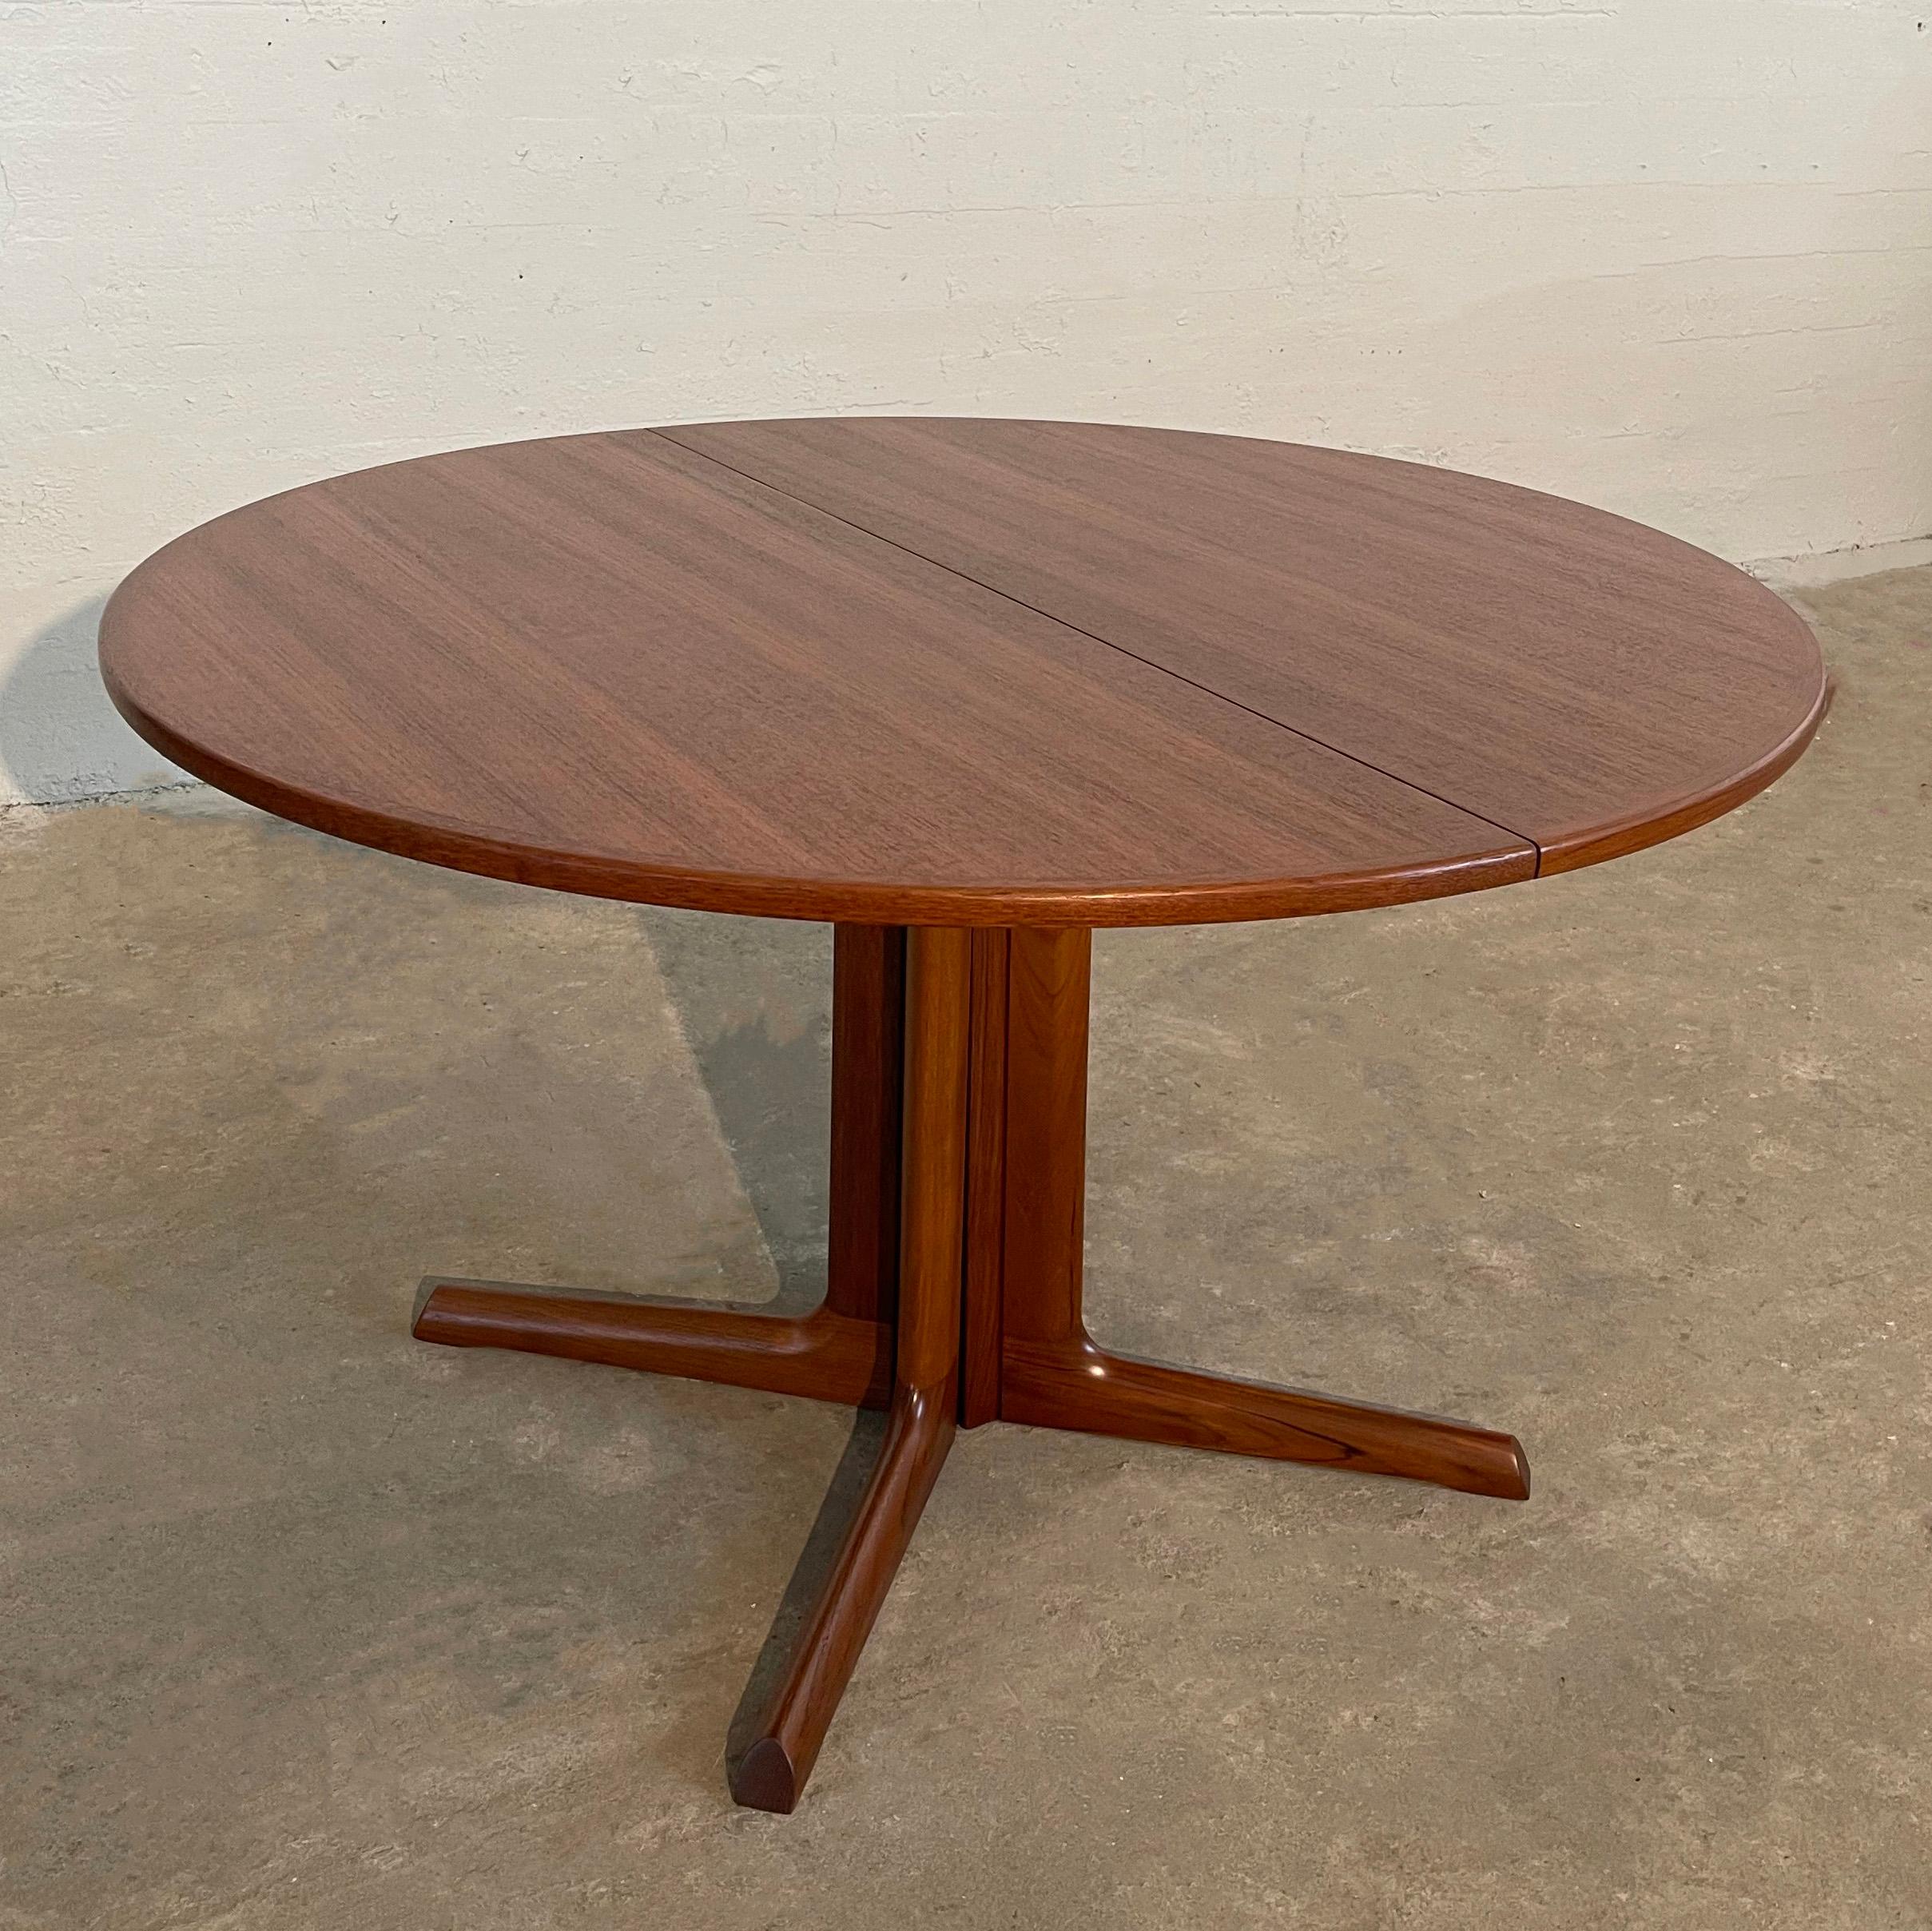 Scandinavian modern, teak dining table features a round top with edged border on a sculptural 4 prong pedestal base. The table seats 4 but extends to a 67 inch wide oval with a separate 19 inch leaf to accommodate 6 people comfortably.  Shown with